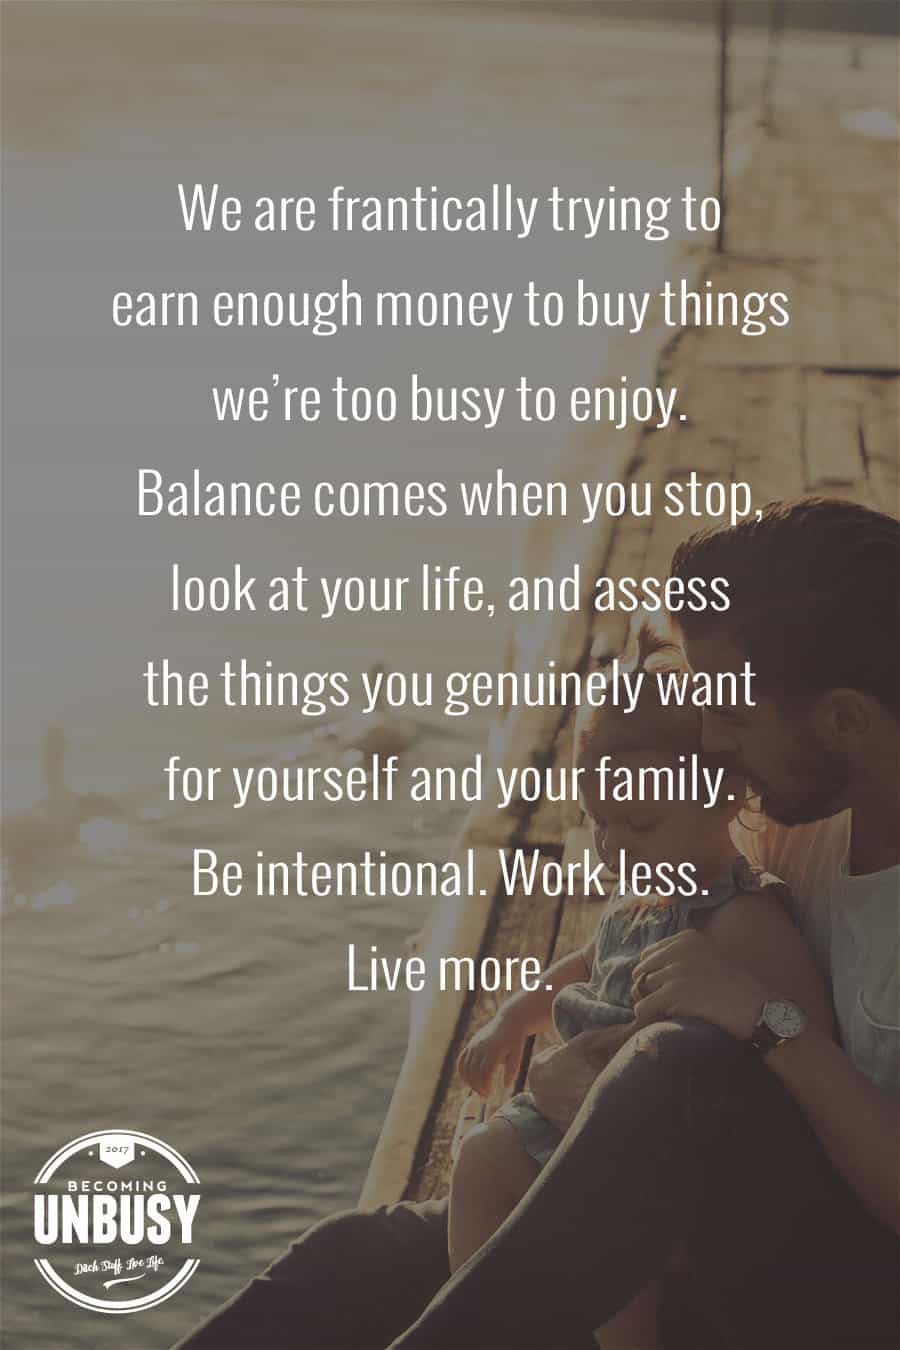 We are frantically trying to earn enough money to buy things we're too busy to enjoy. Balance comes when you stop, look at your life, and assess the things you genuinely want for yourself and your family. Be intentional. Work less. -- 10 inspirational quotes about life that will help you focus on what's important #quotes #lifequotes #inspirationalquotes *Loving this collection of life quotes!